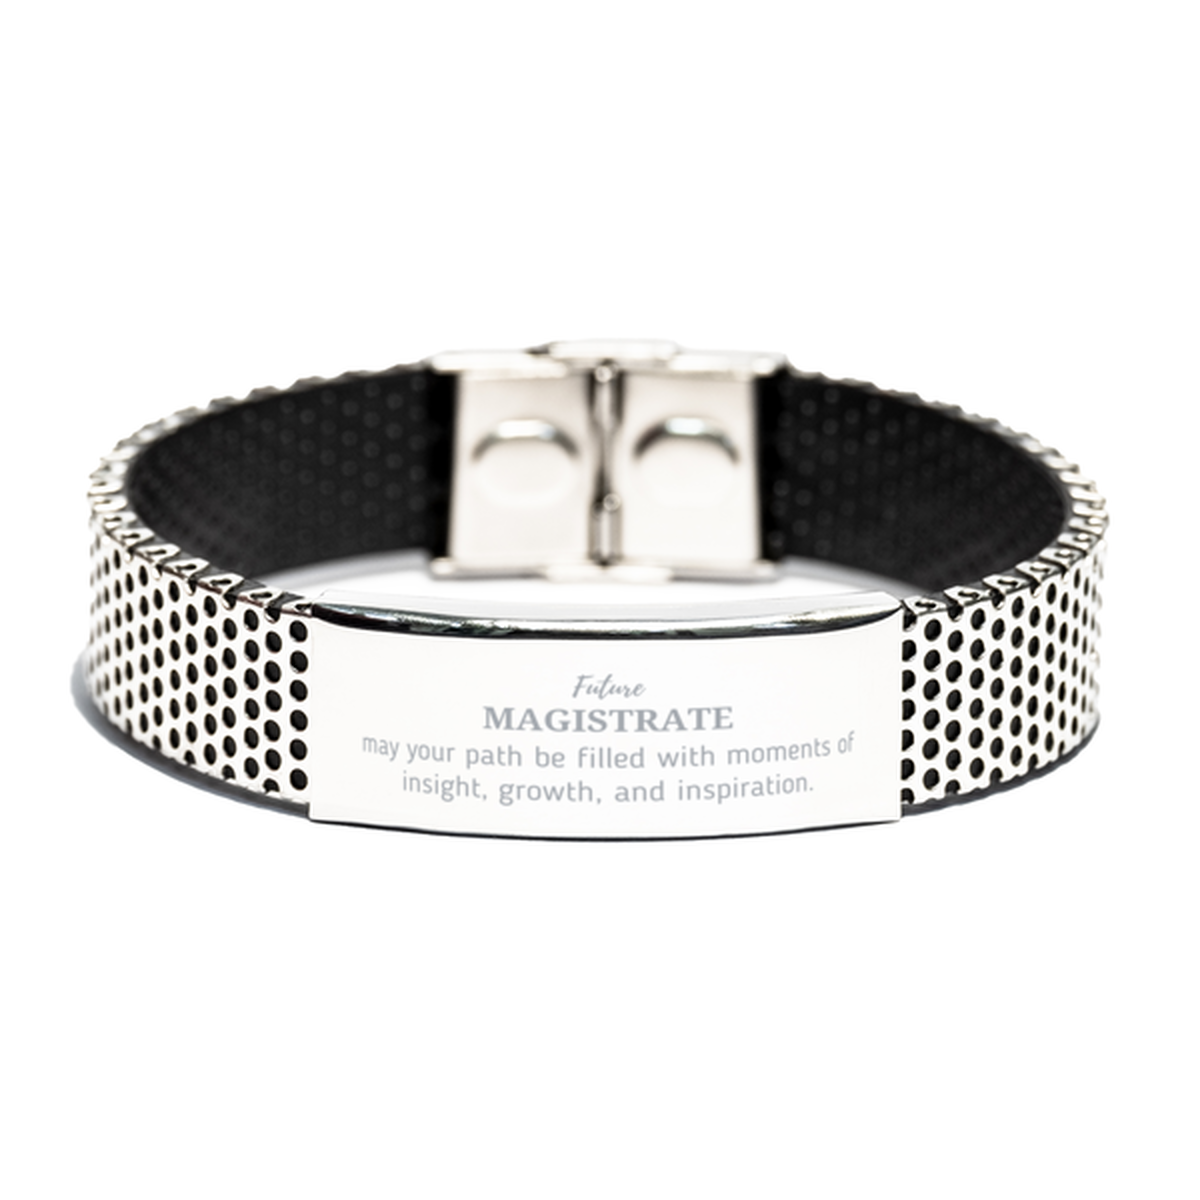 Future Magistrate Gifts, May your path be filled with moments of insight, Graduation Gifts for New Magistrate, Christmas Unique Stainless Steel Bracelet For Men, Women, Friends